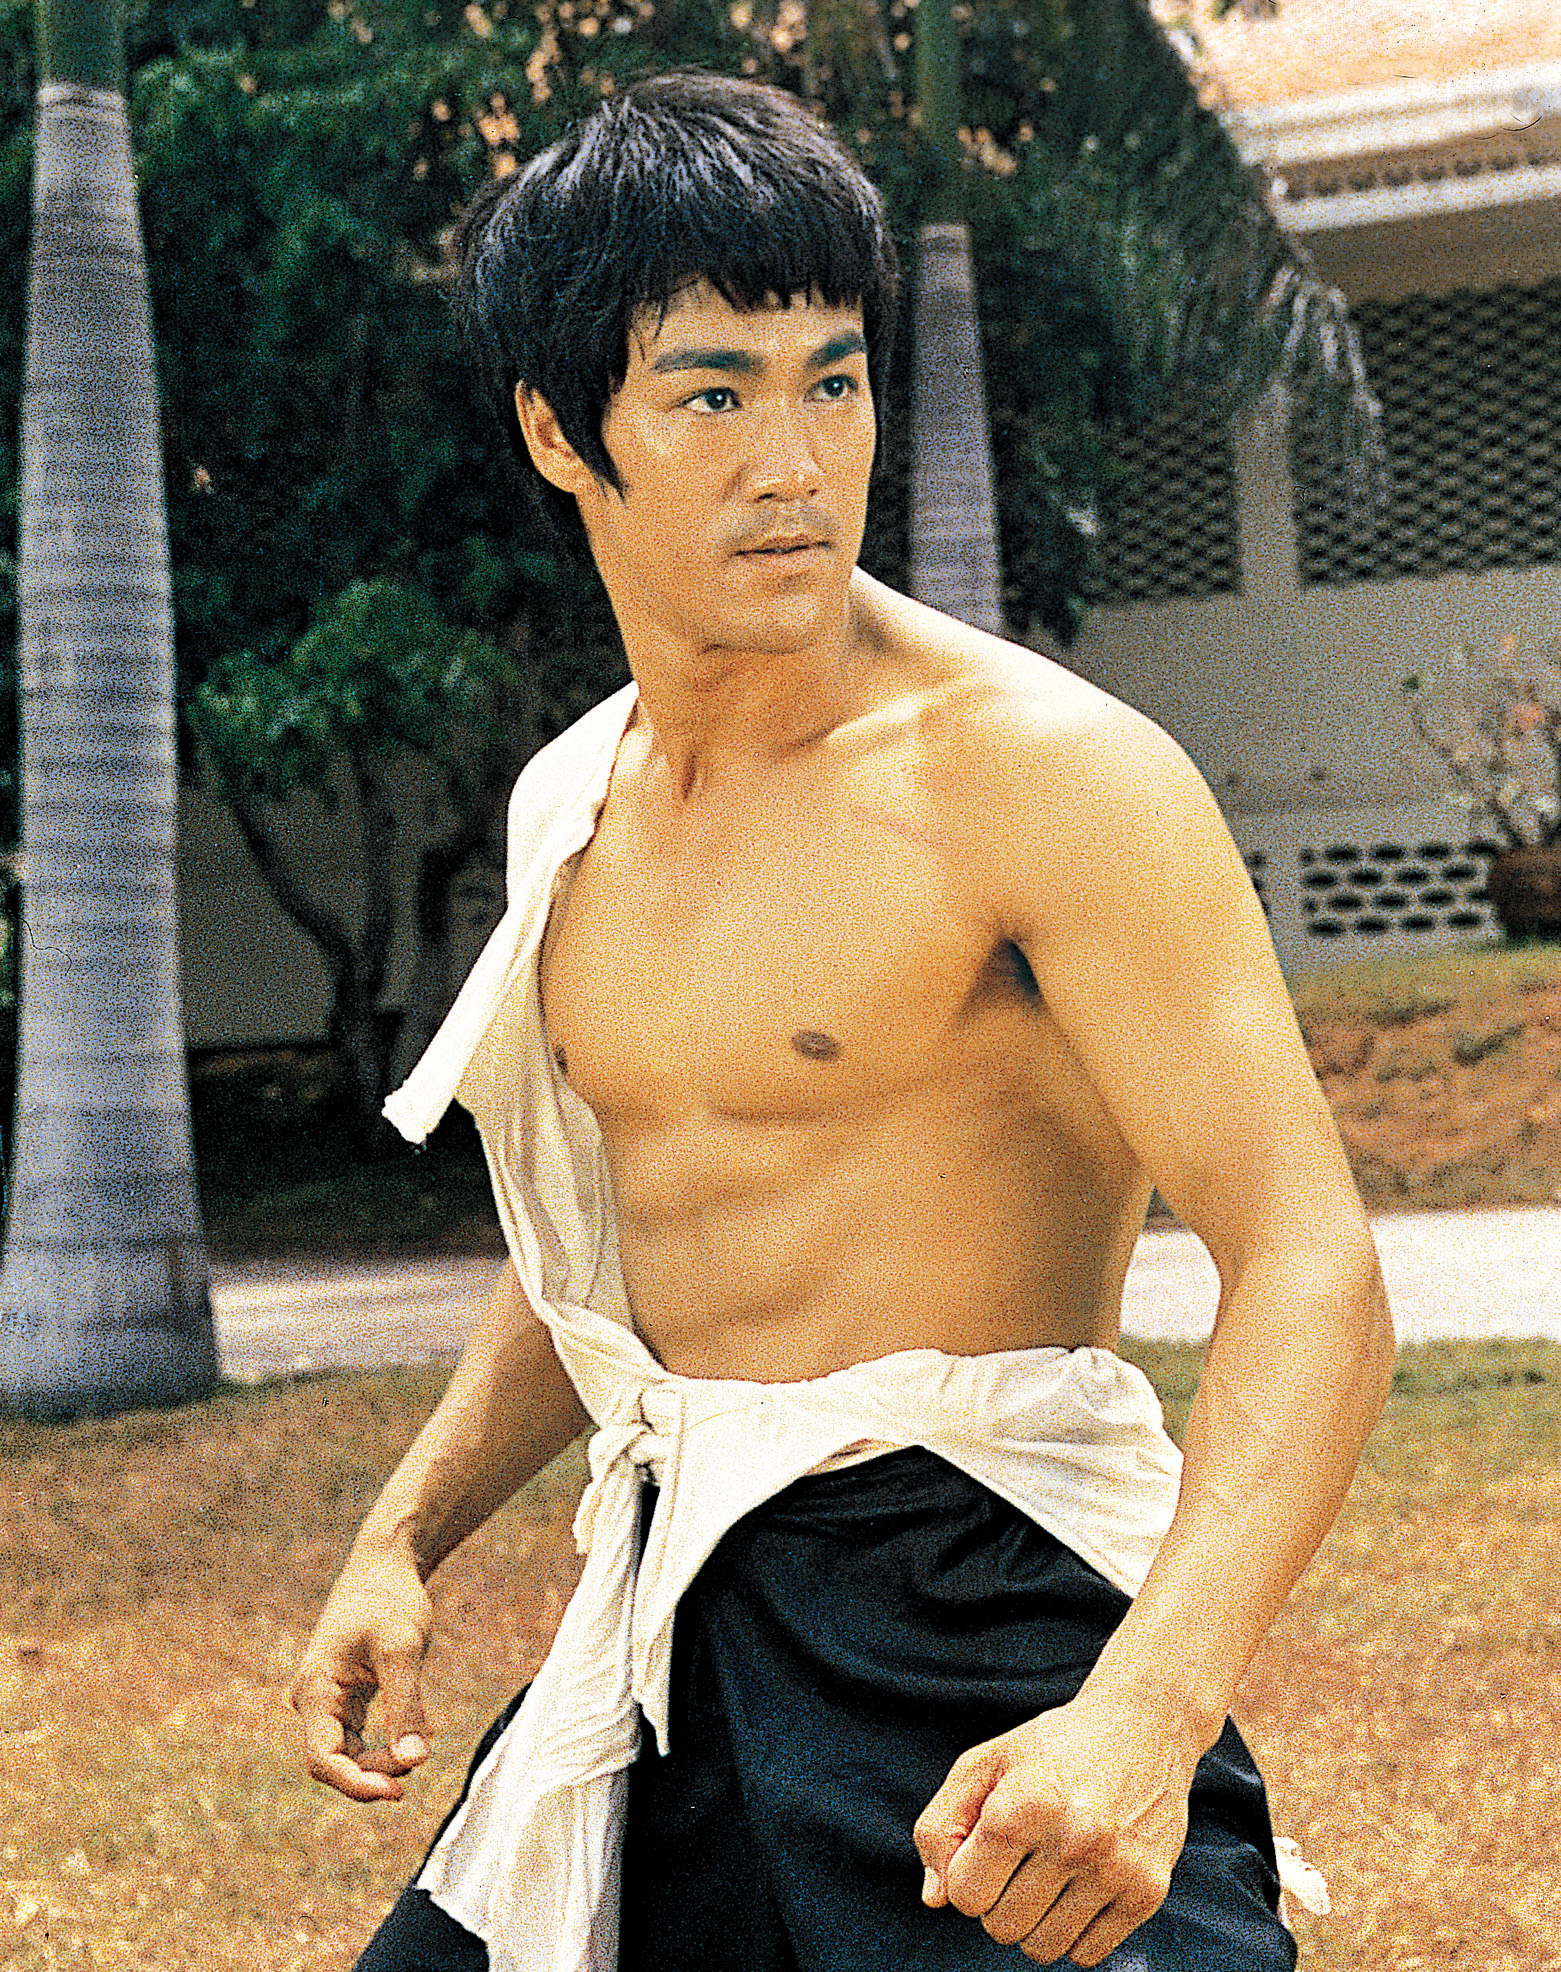 his shirtless character in martial arts stance with focused expression